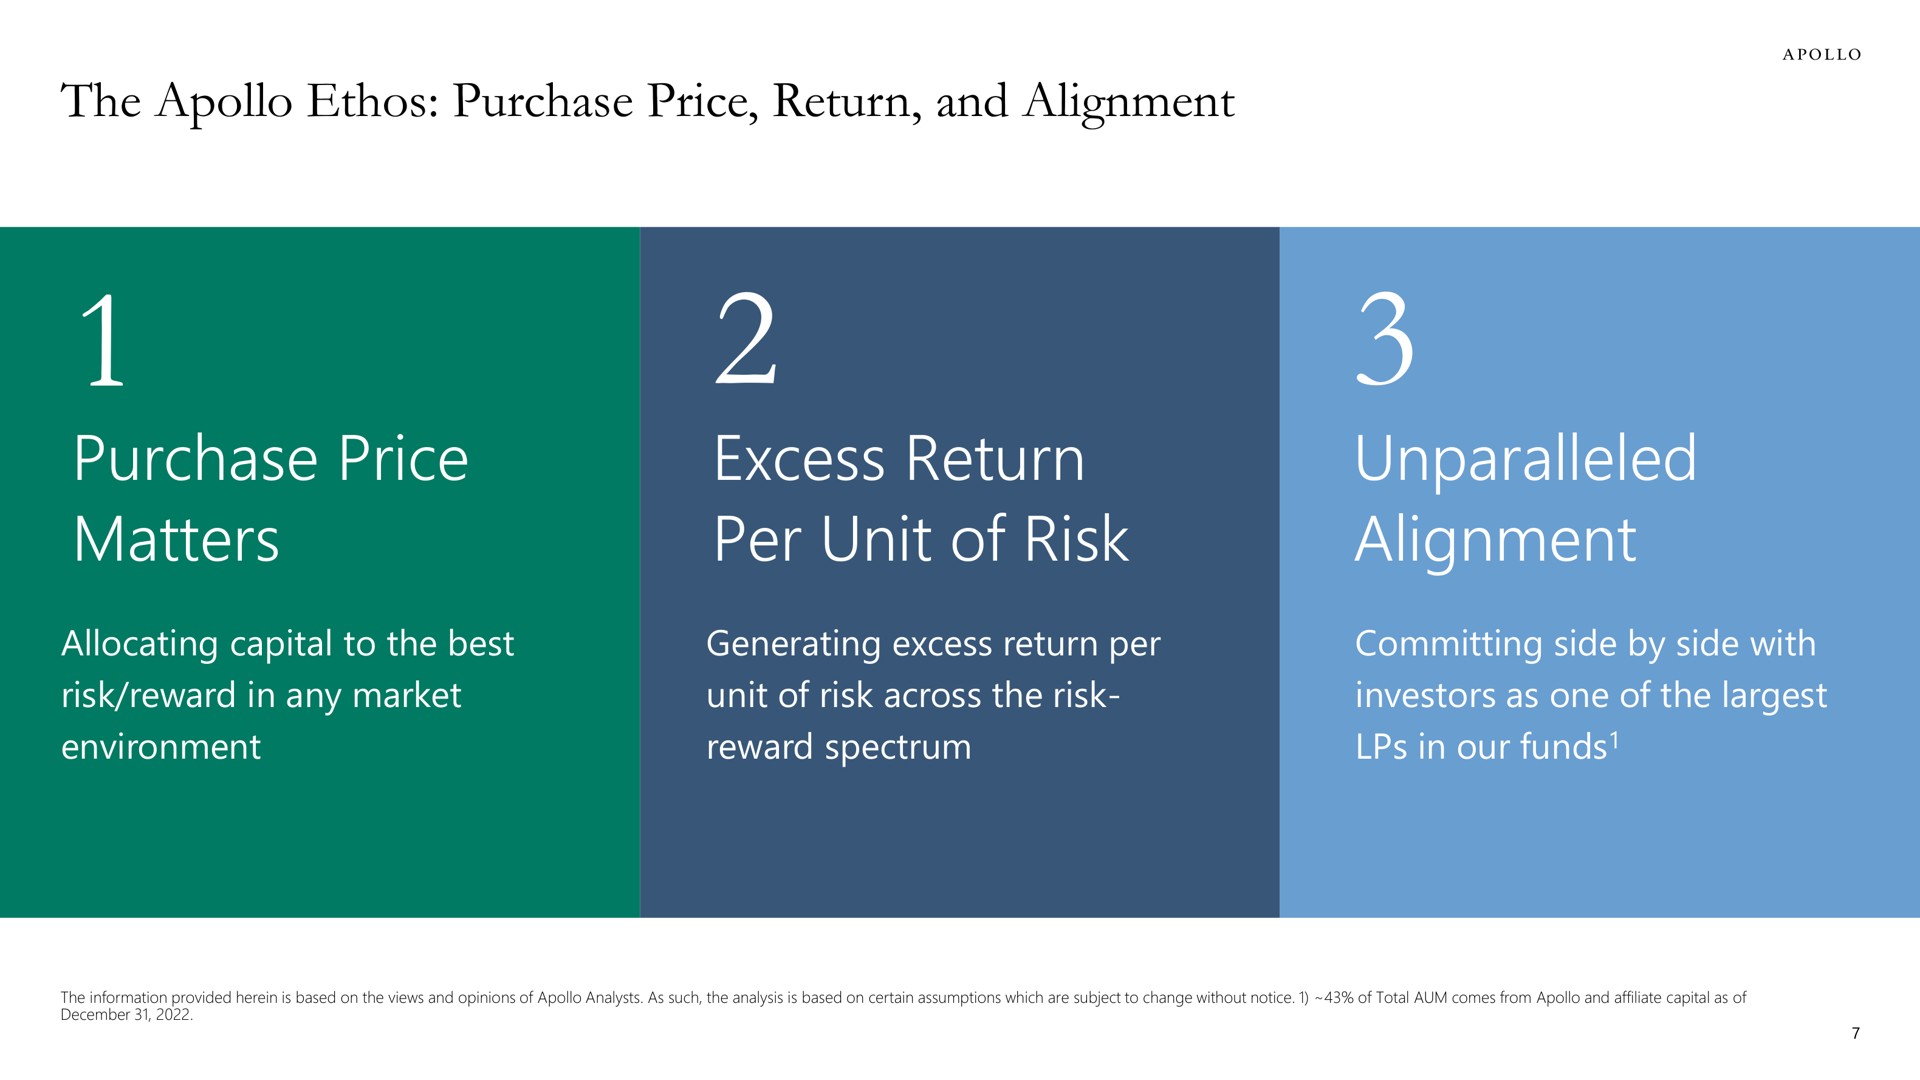 the ethos purchase price return and alignment purchase price matters excess return per unit of risk unparalleled alignment | Apollo Global Management